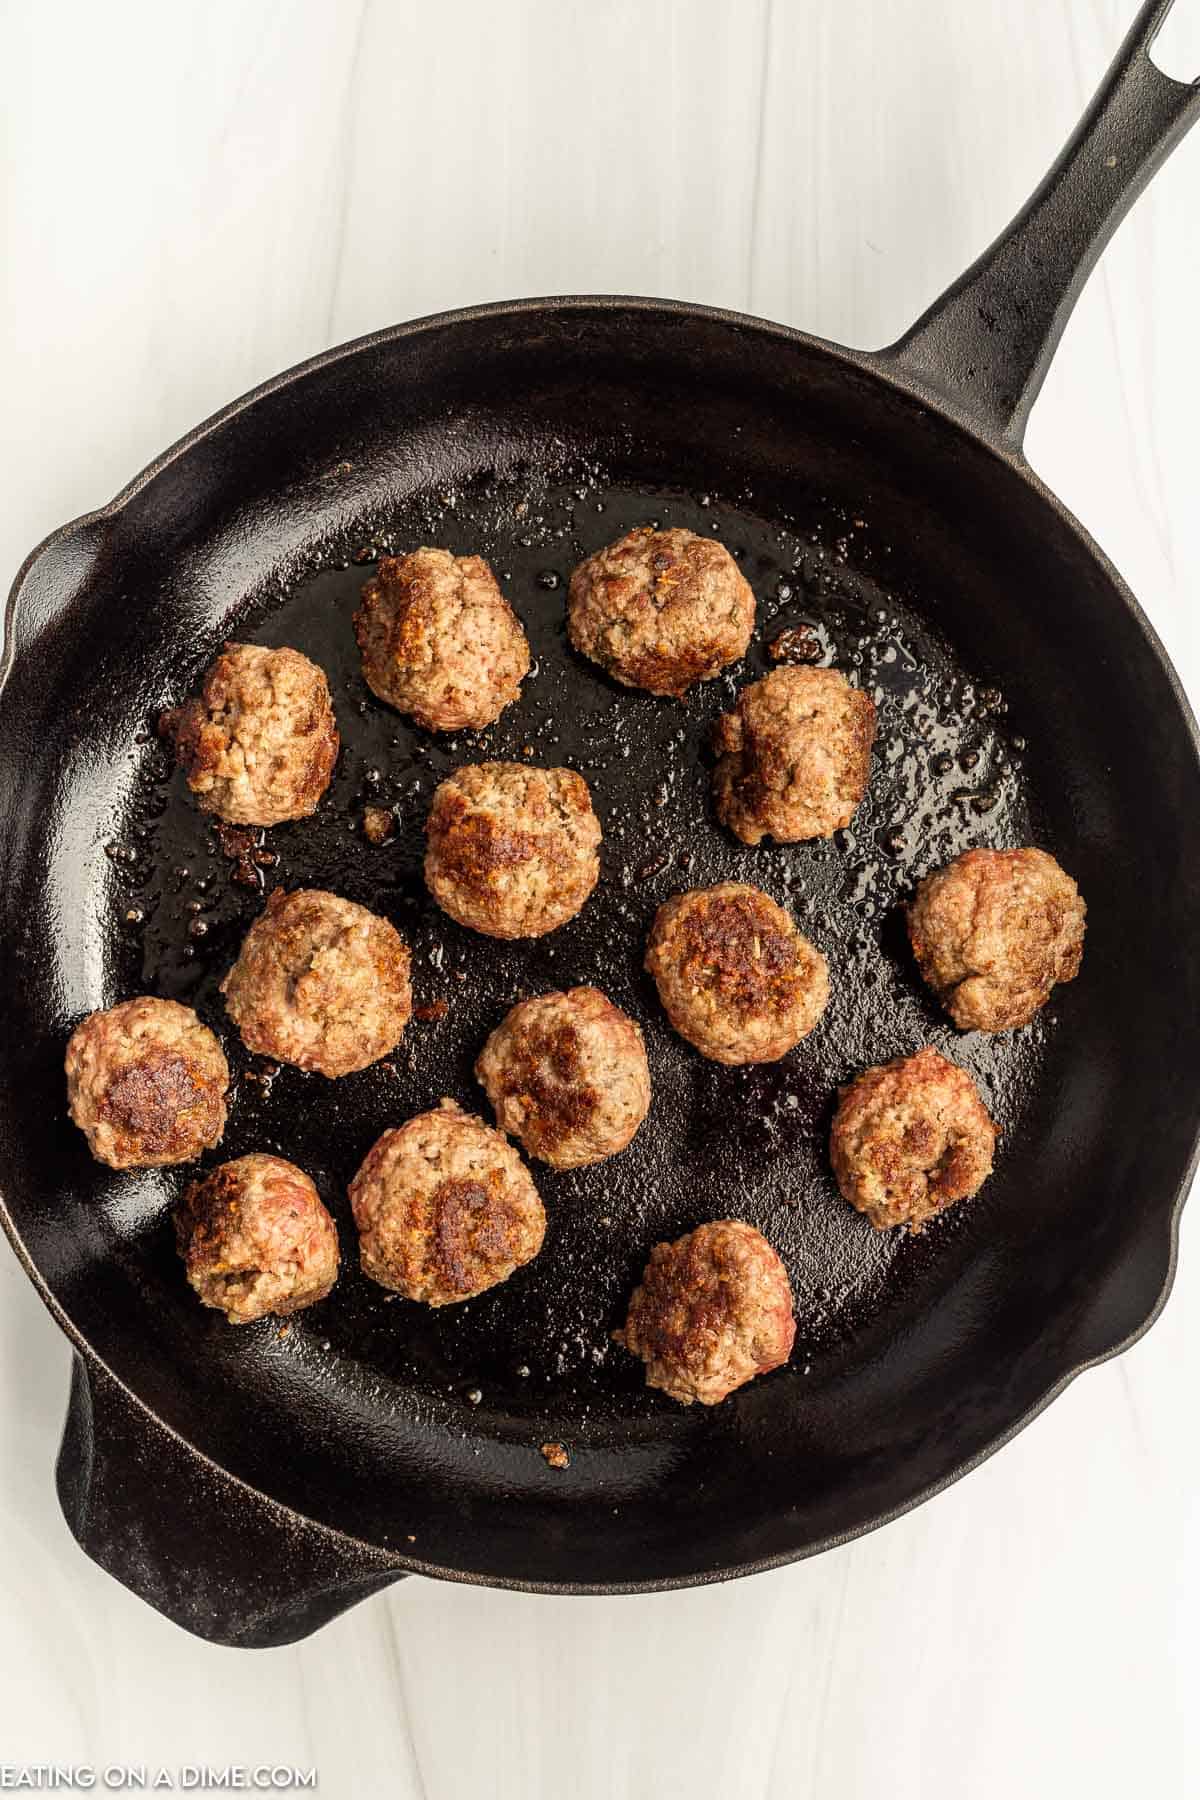 Cooking meatballs in a cast iron skillet